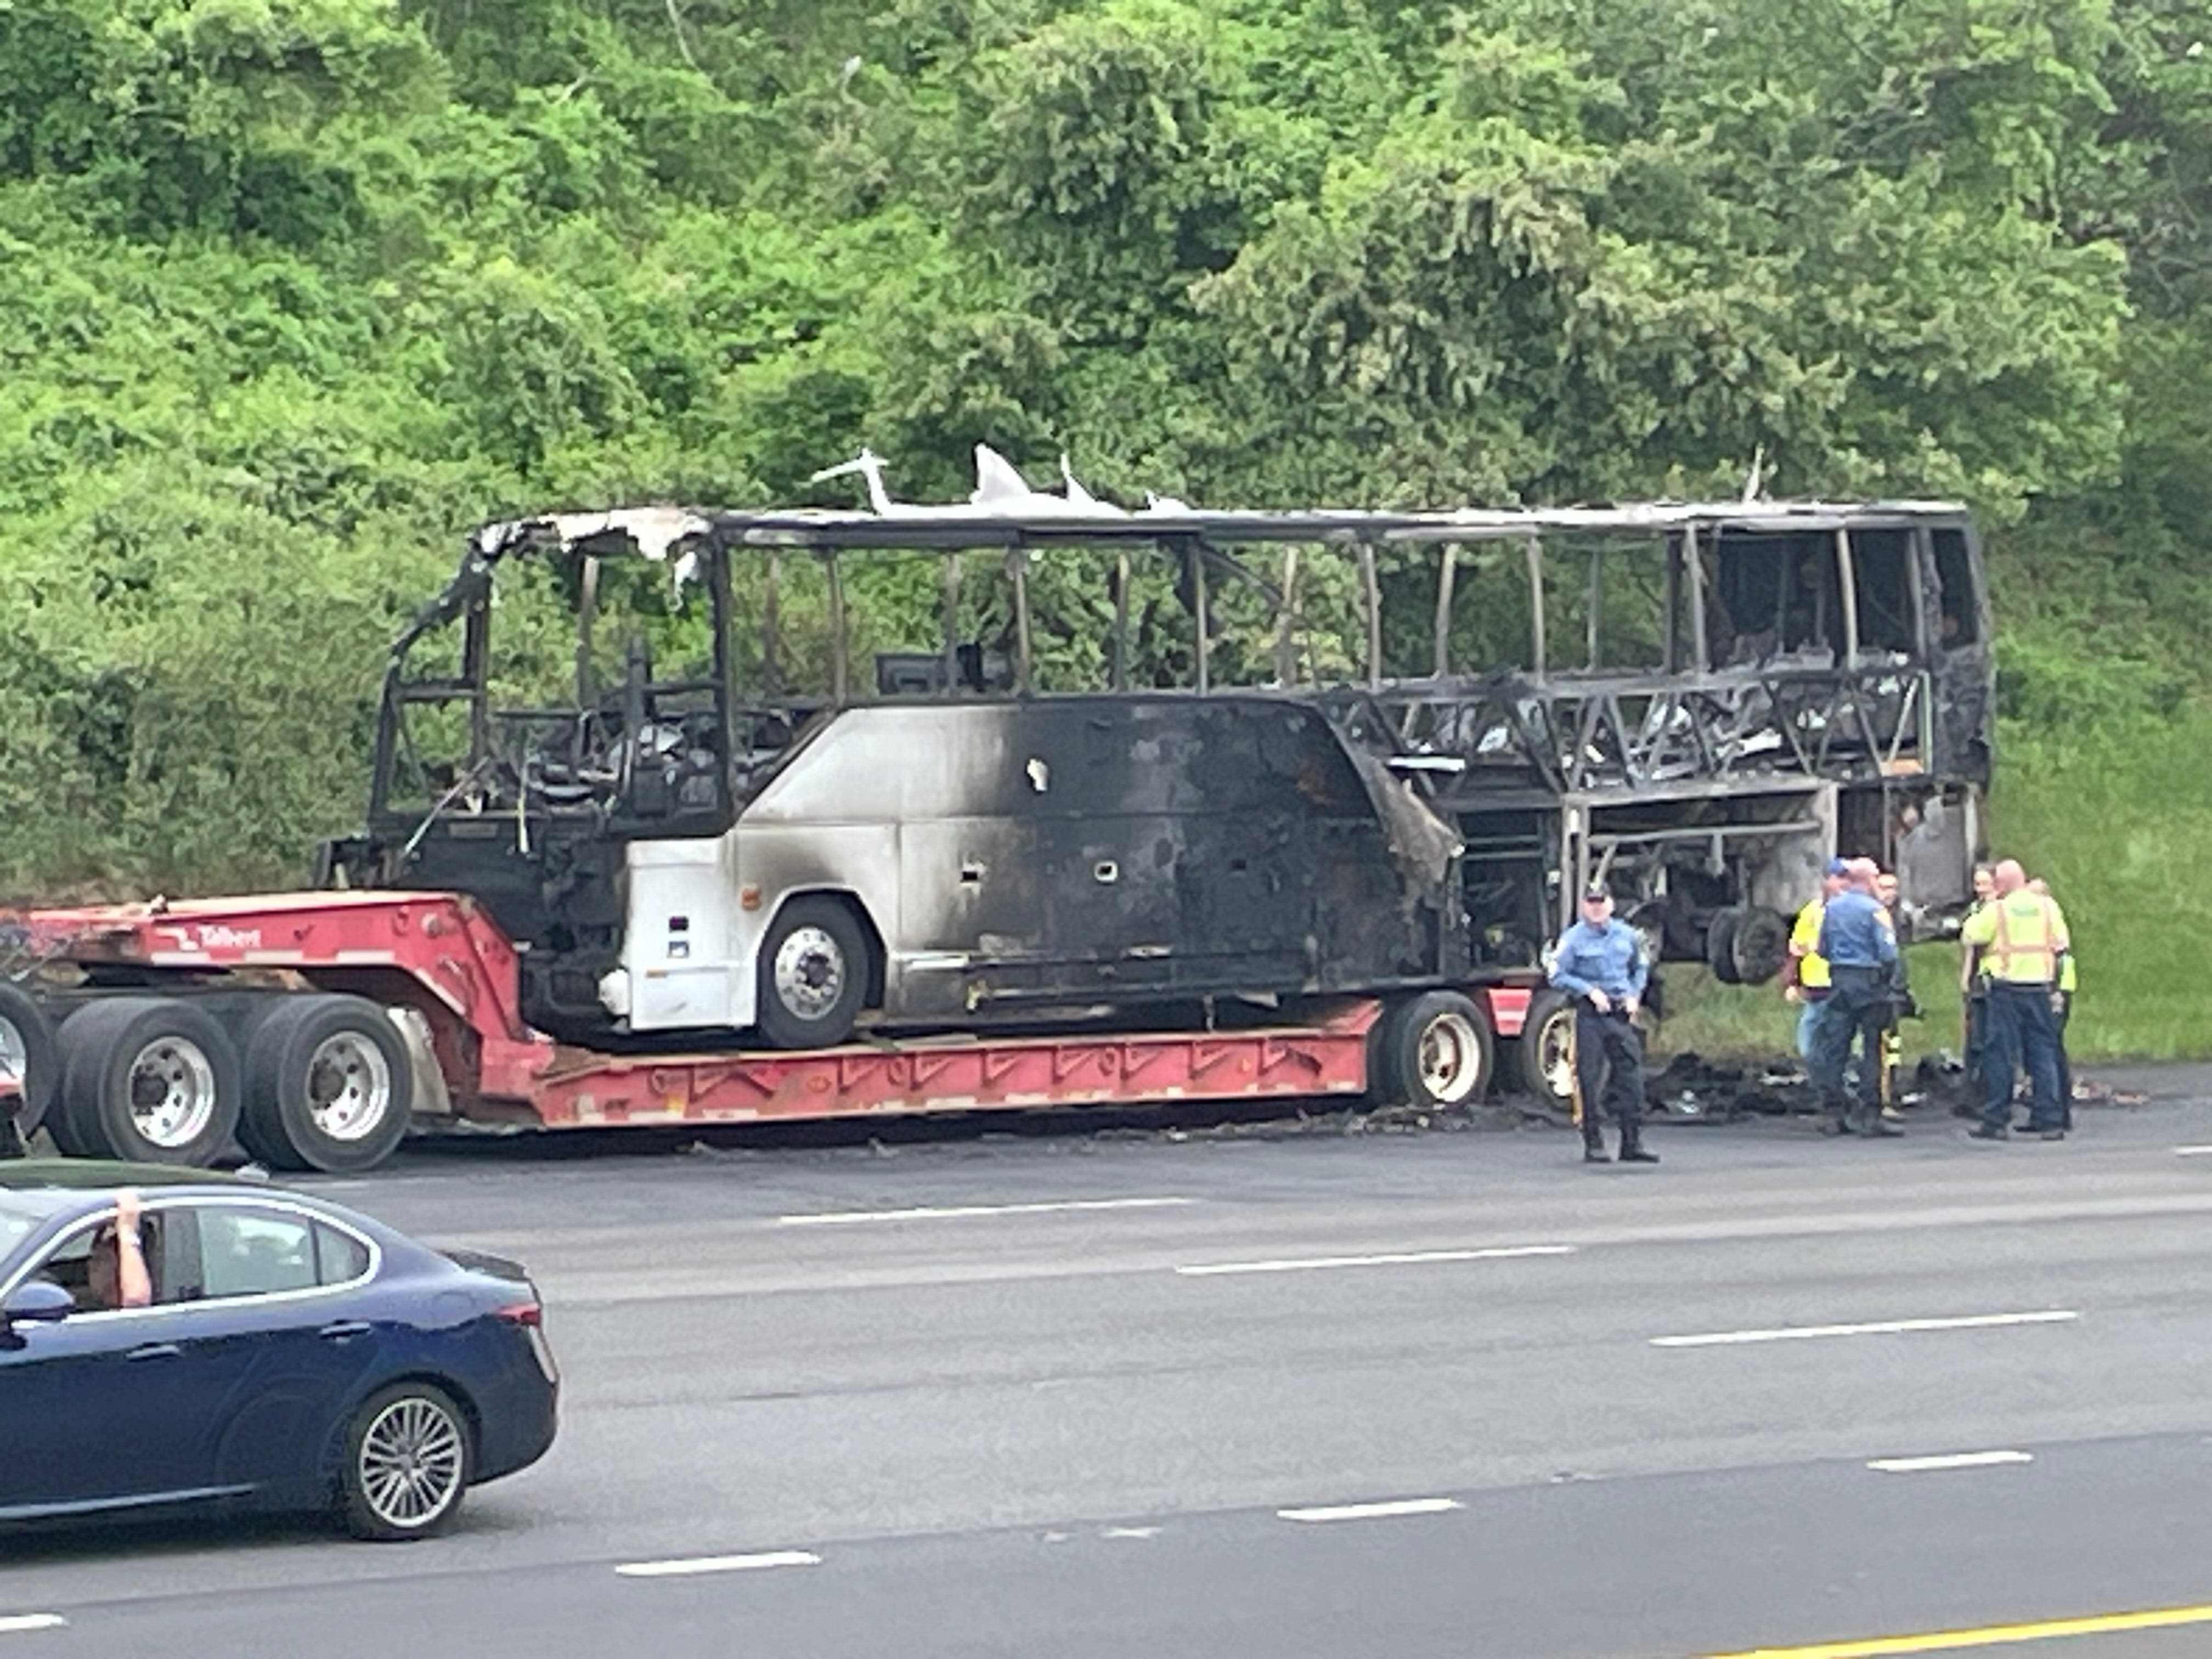 One injured in bus fire on Garden State Parkway in Wall that caused traffic backup